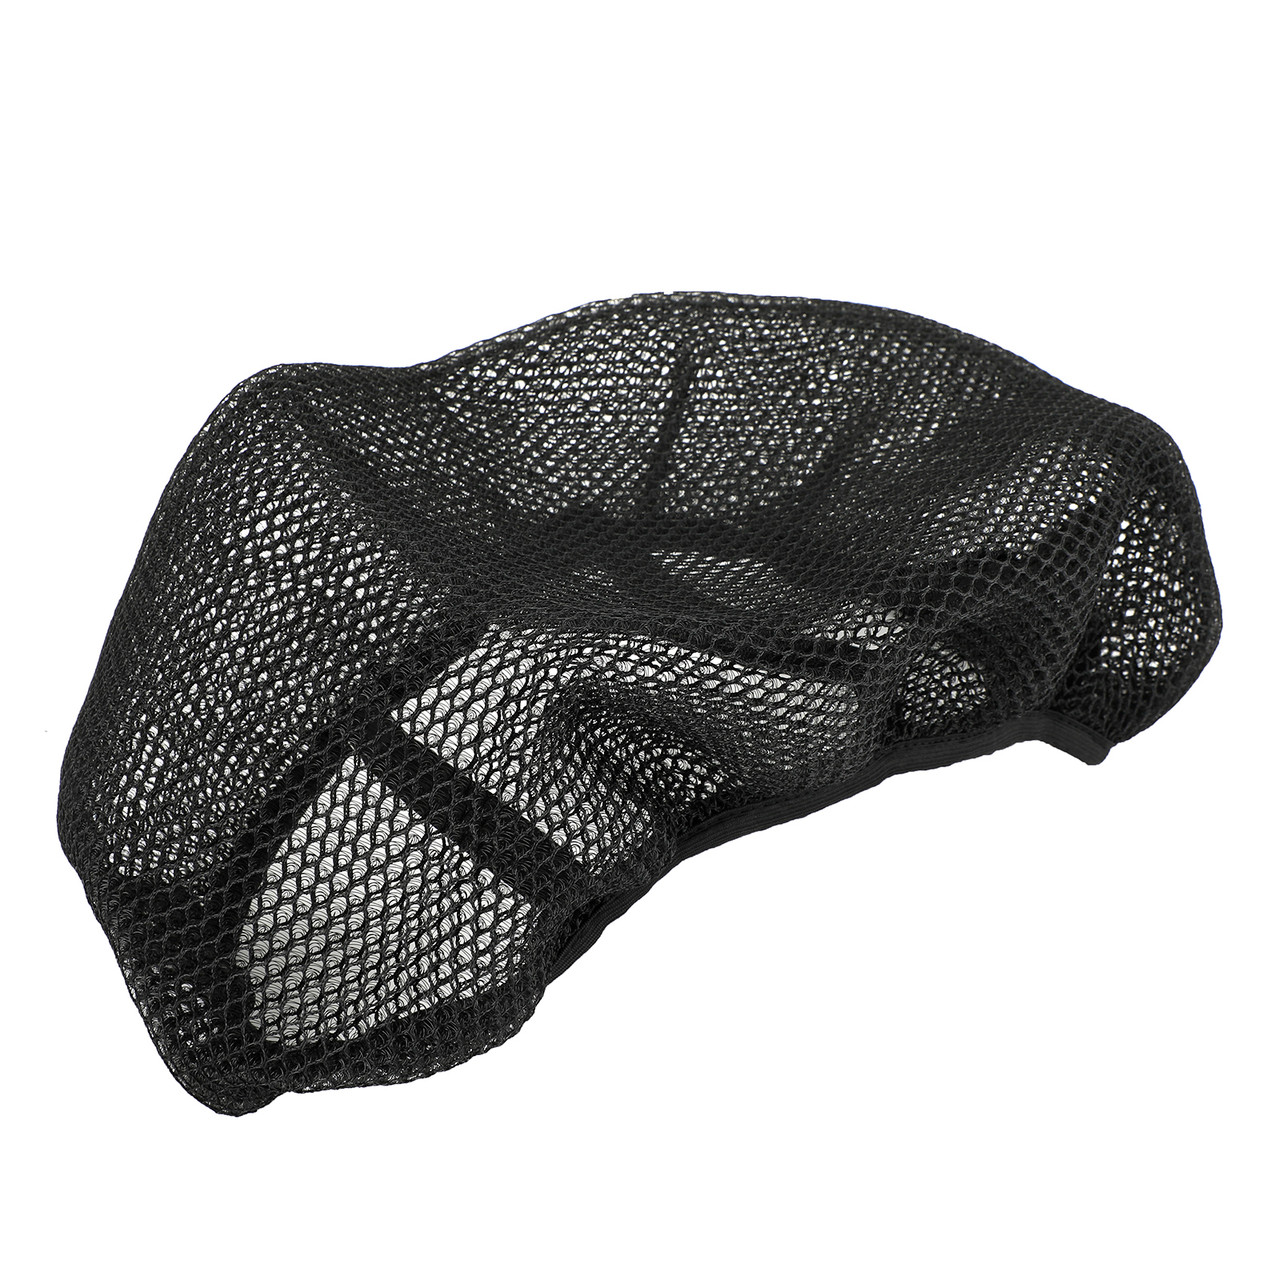 Heat-Resistant Net Seat Mesh Cover Universal L For Motorcycle Scooter Motorbike